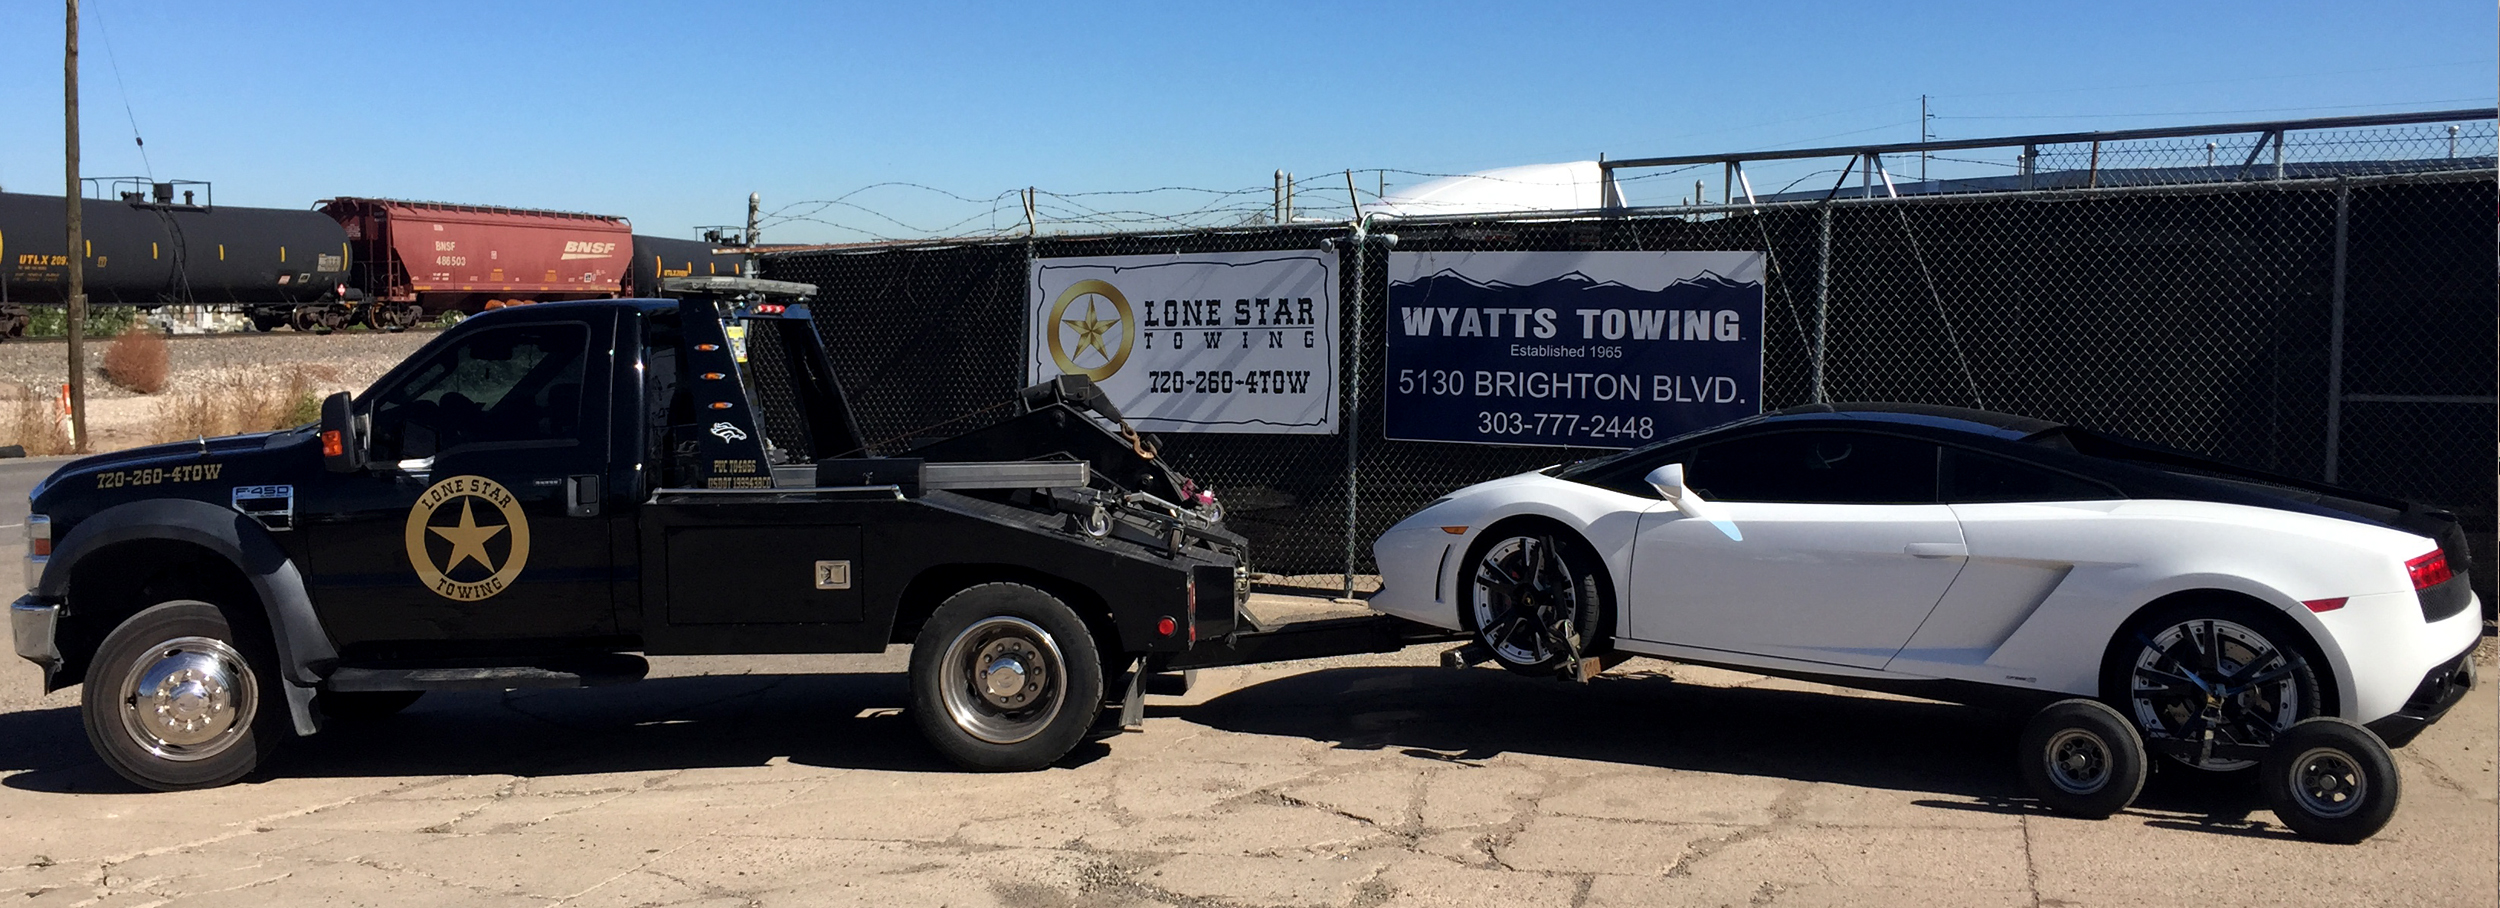 Boulder Valley Towing